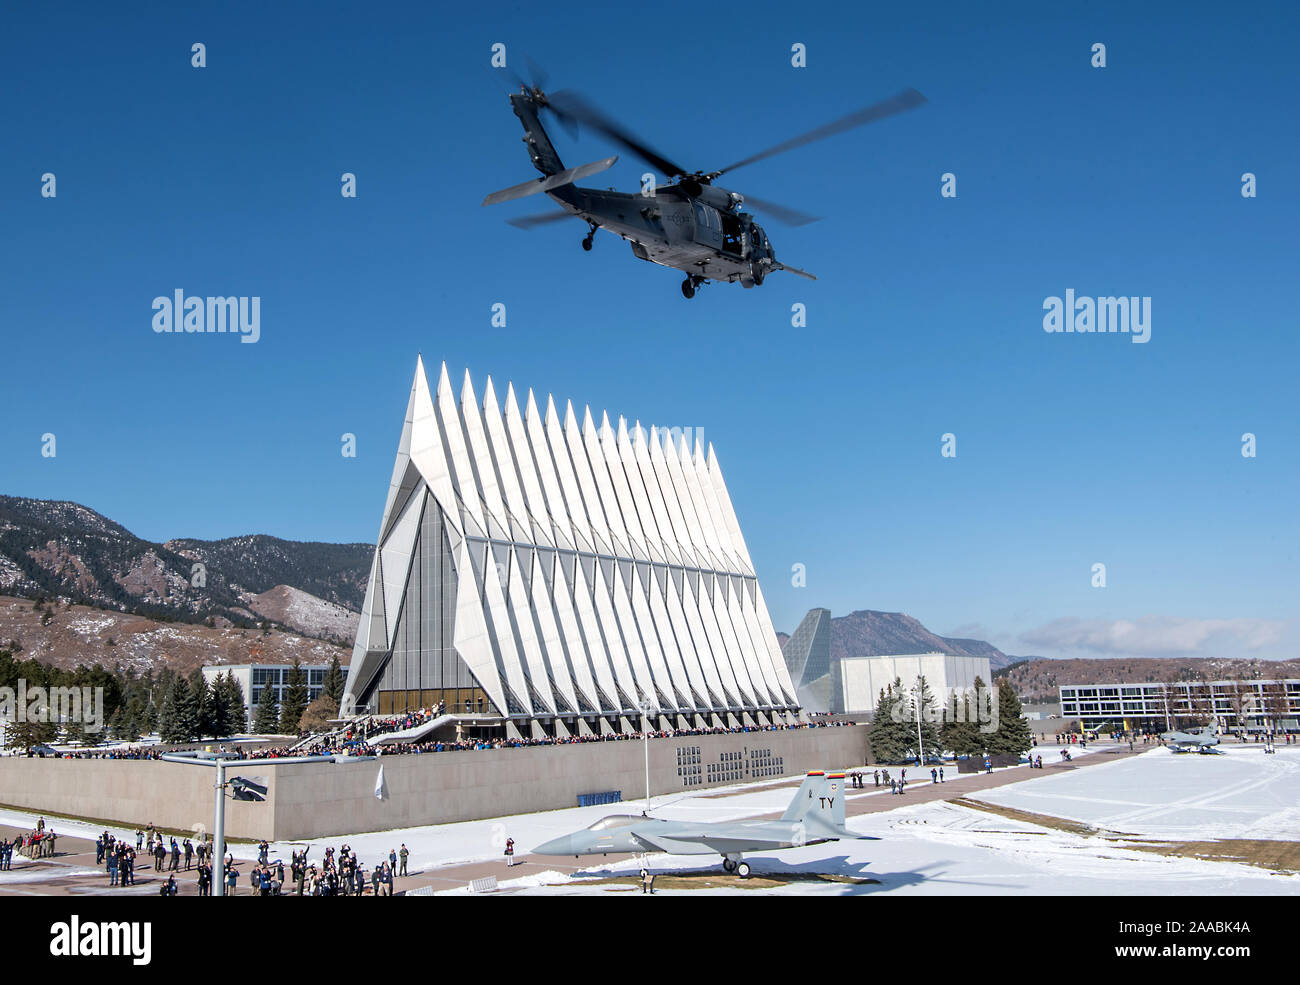 U.S. AIR FORCE ACADEMY, Colo. – A HH-60 helicopter flies over the U.S. Air Force Academy Terrazzo on Nov. 1, 2019 during an airpower demonstration. The demonstration included an assortment of aircraft from fighter jets to helicopters, including a CV-22 Osprey. (U.S. Air Force photo/Trevor Cokley) Stock Photo